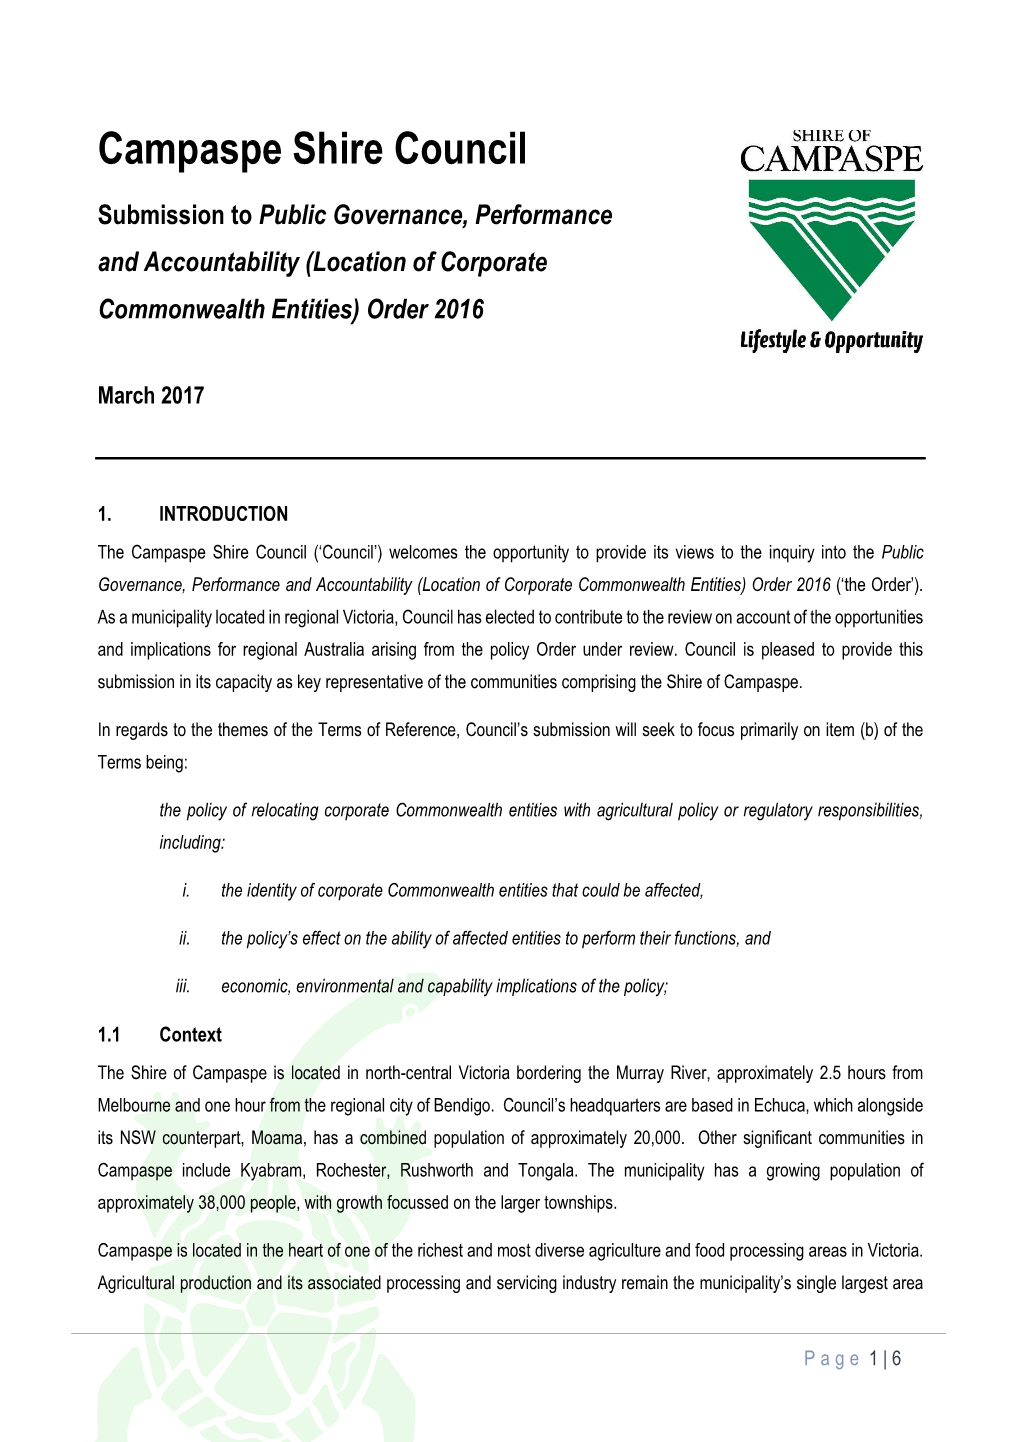 Campaspe Shire Council Submission to Public Governance, Performance and Accountability (Location of Corporate Commonwealth Entities) Order 2016